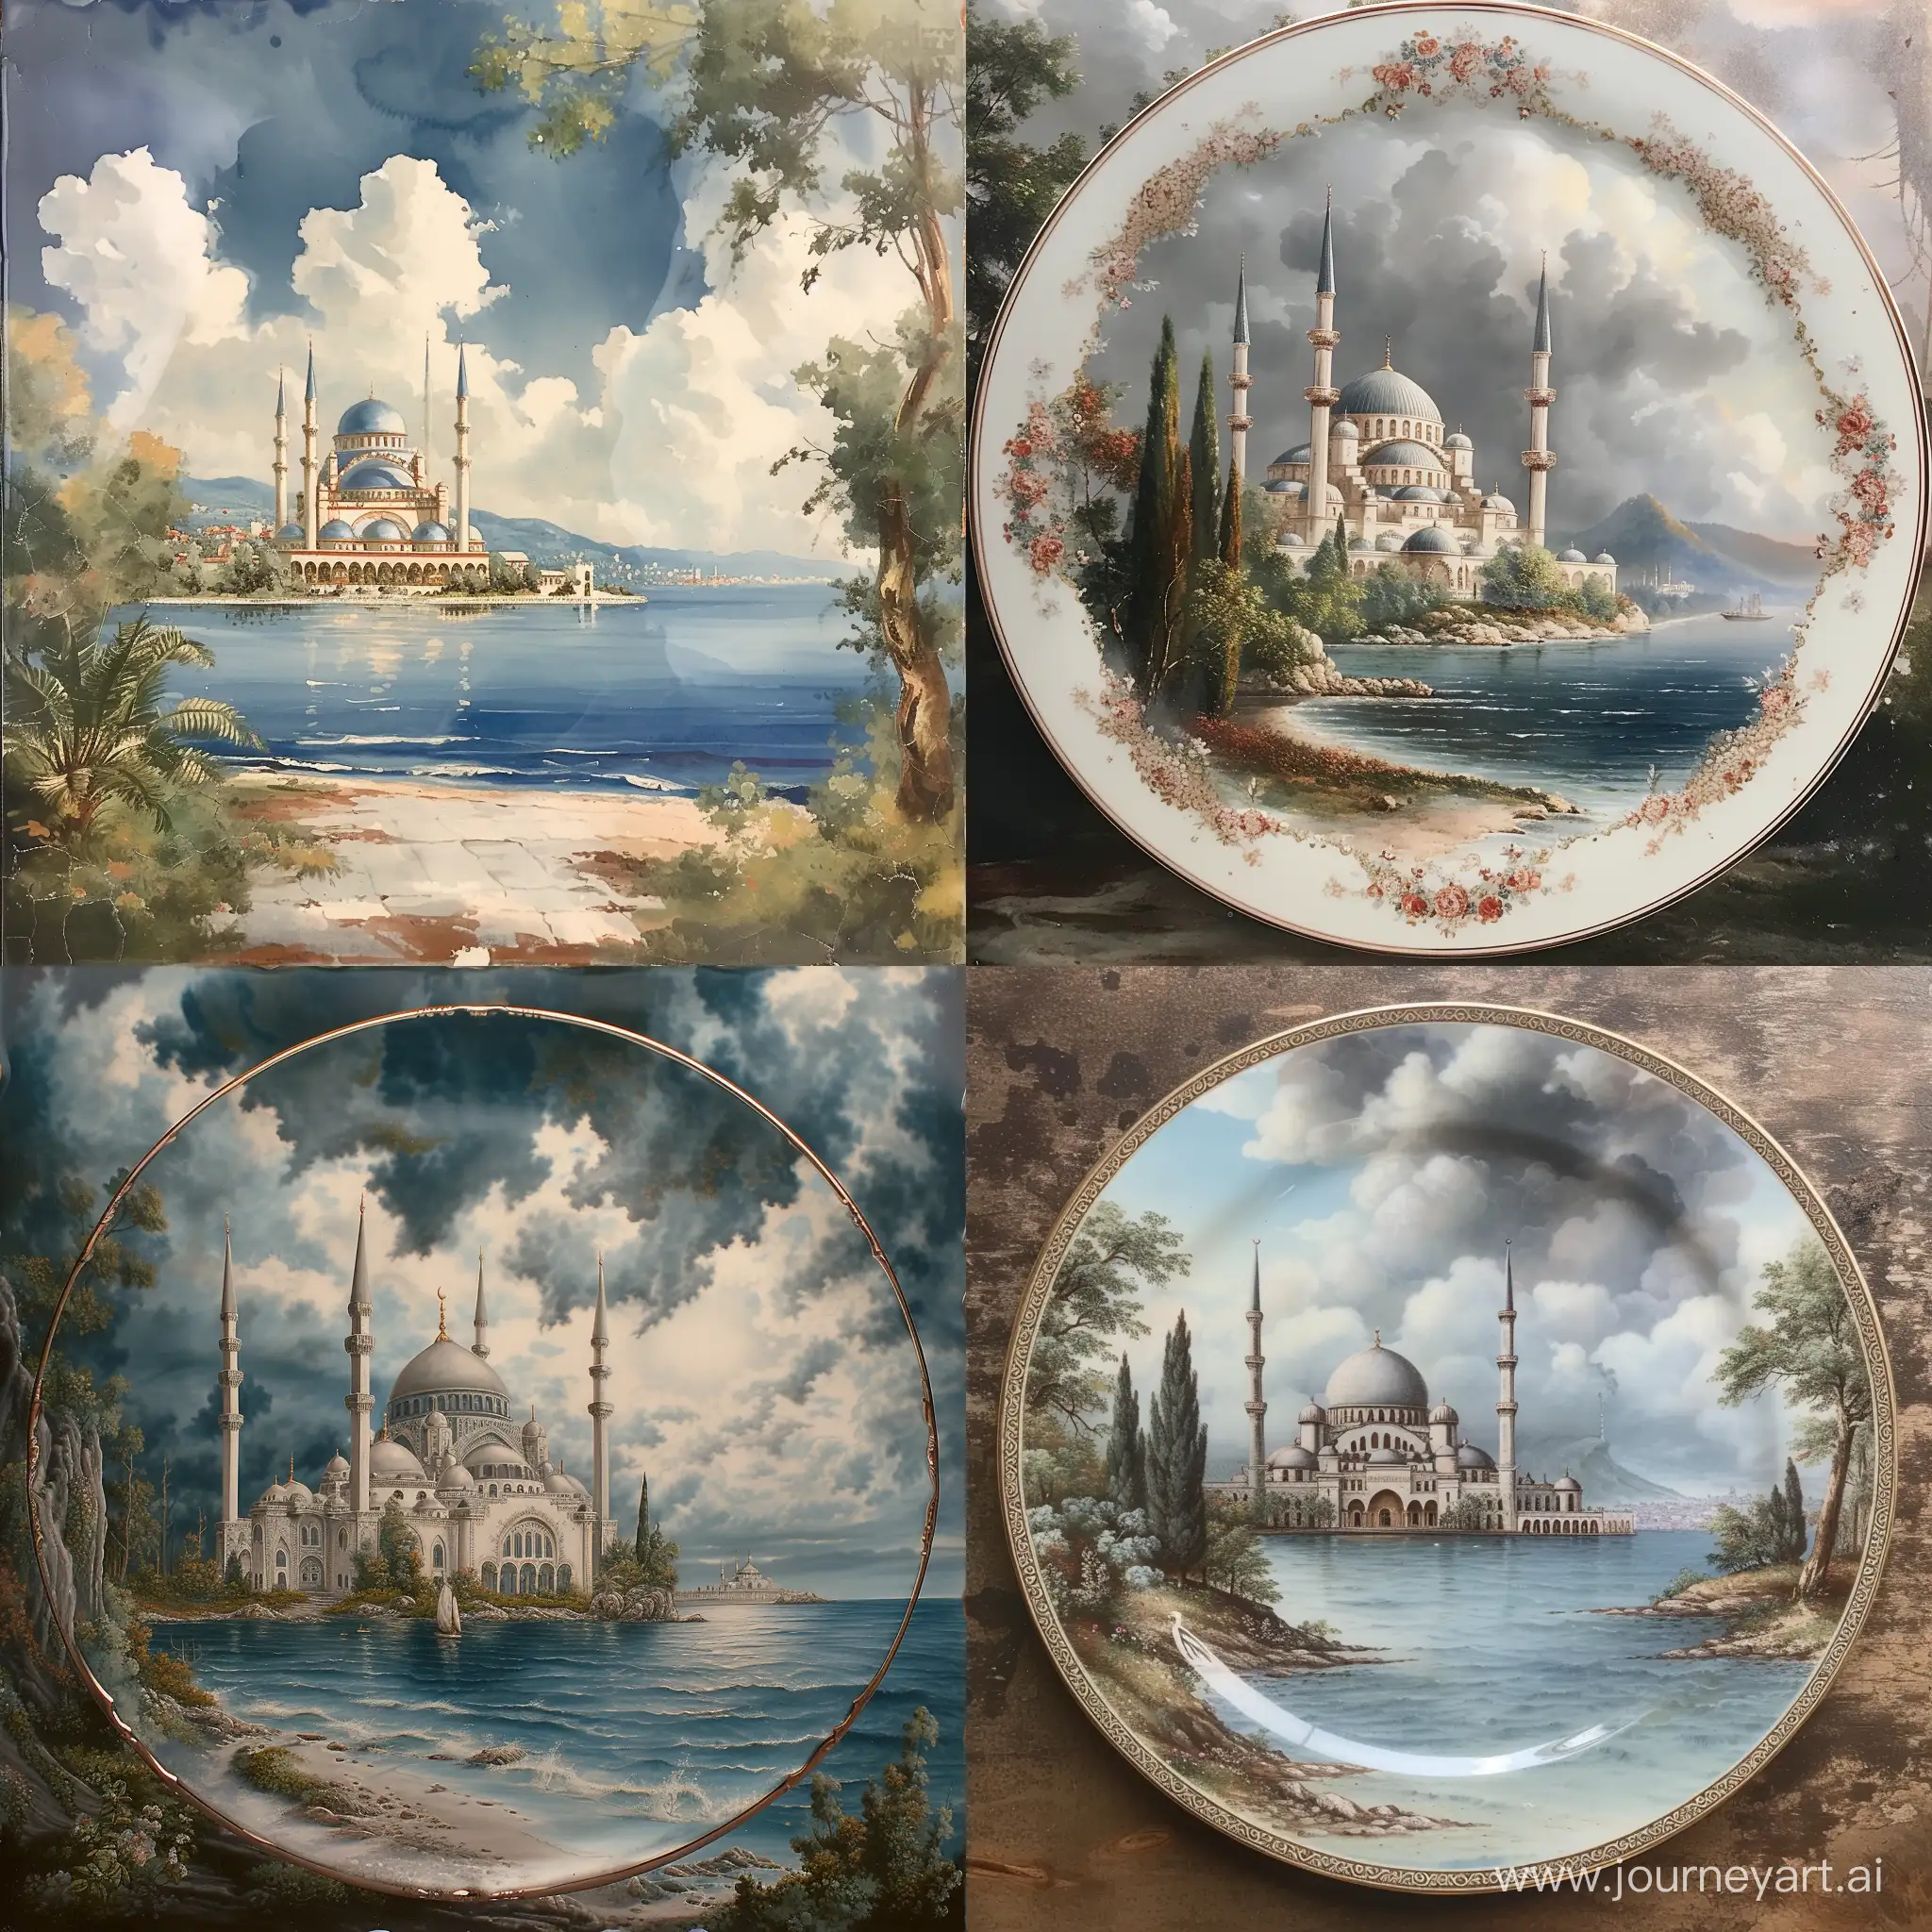 Clouse view of a porcelain, depicting a beautiful mosque beyond sea under cloudy sky 